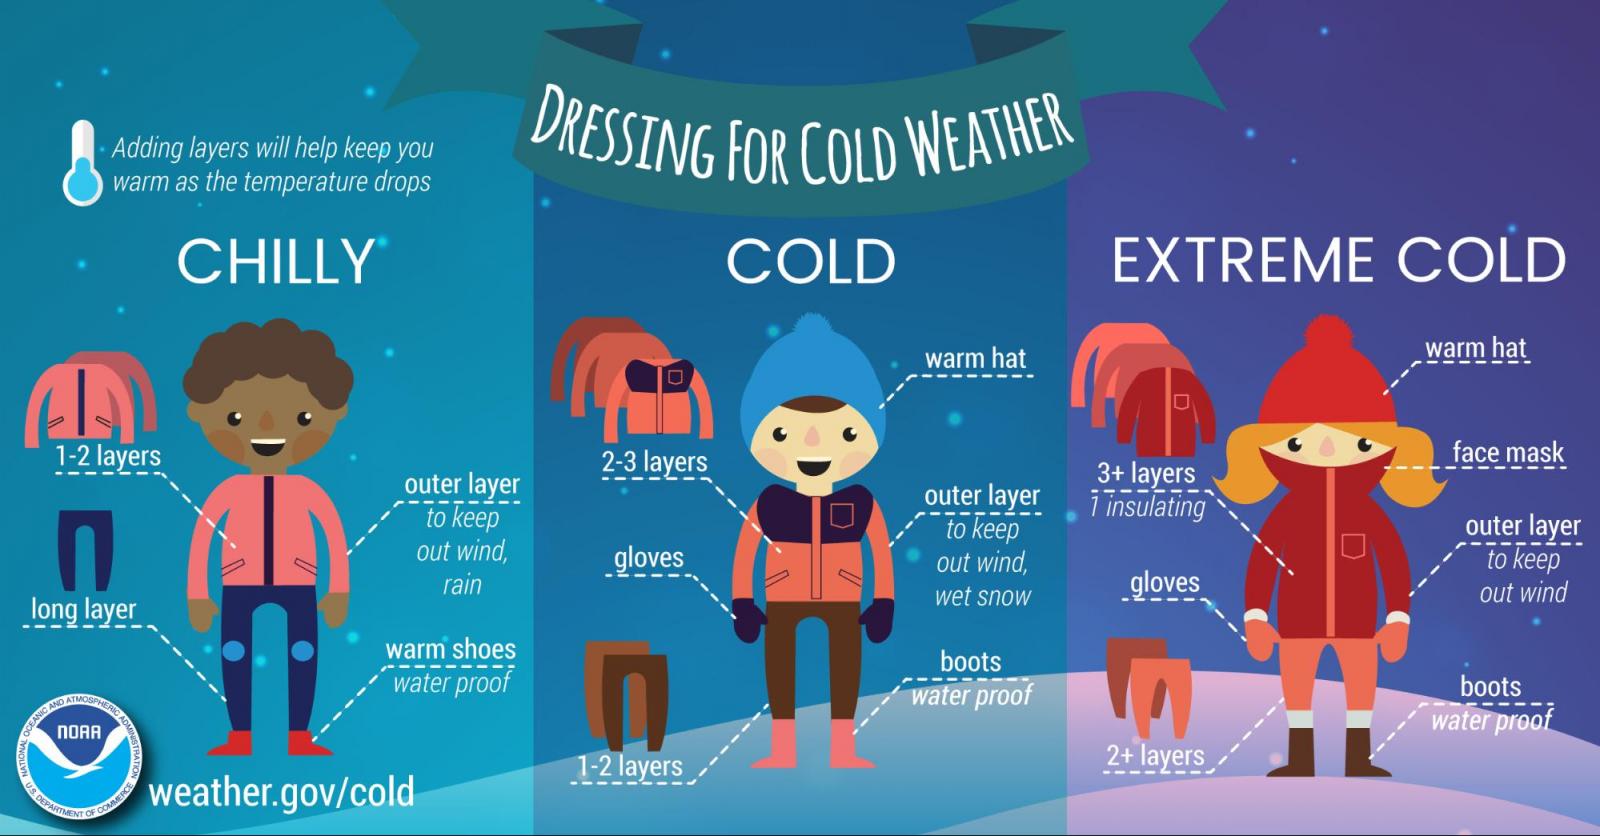 Tips for Dressing for Cold Weather